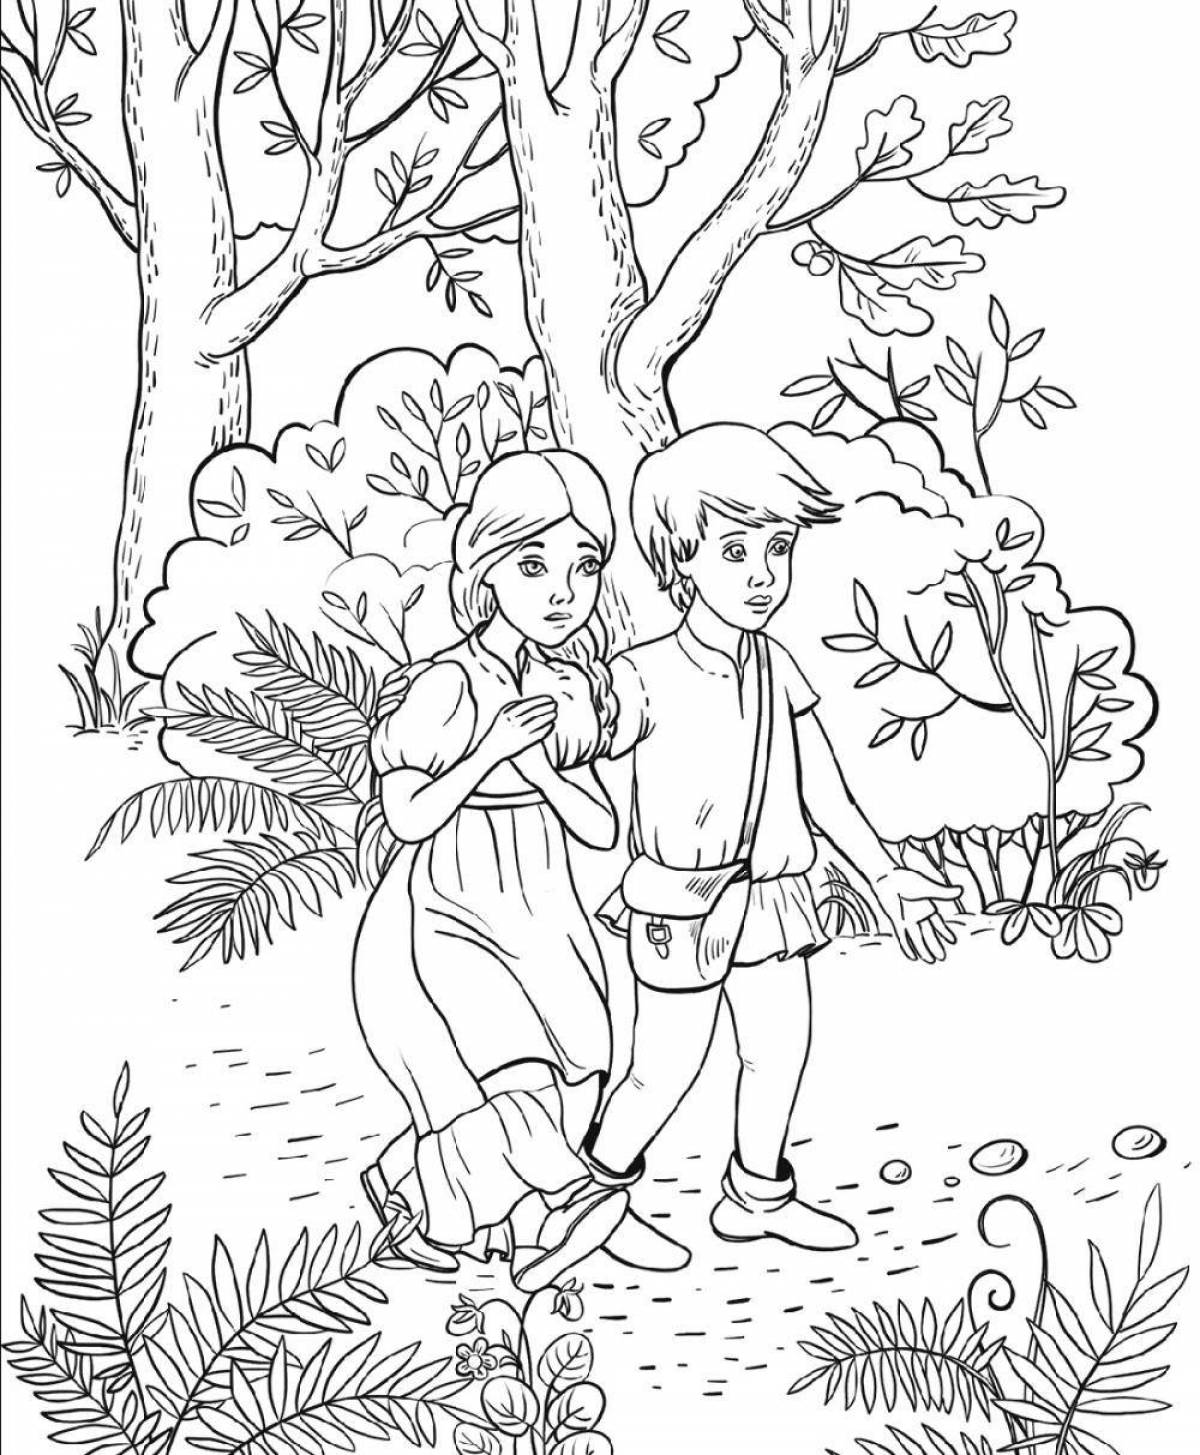 Colorful coloring of Hansel and Gretel